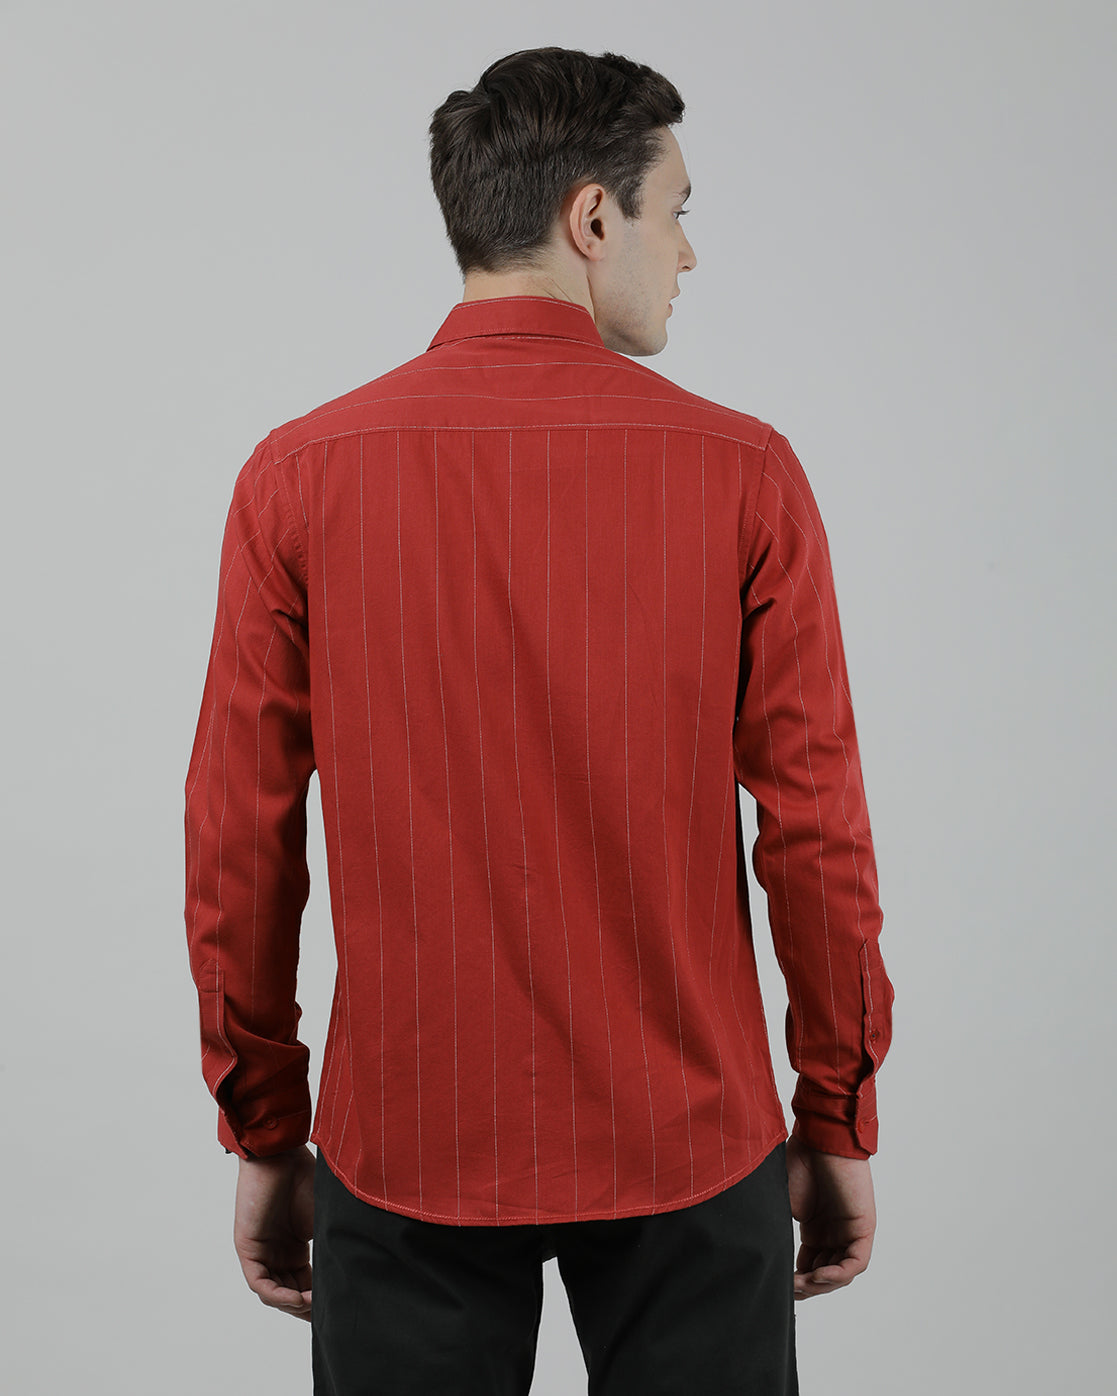 Casual Red Full Sleeve Slim Fit Stripe Shirt with Collar for Men